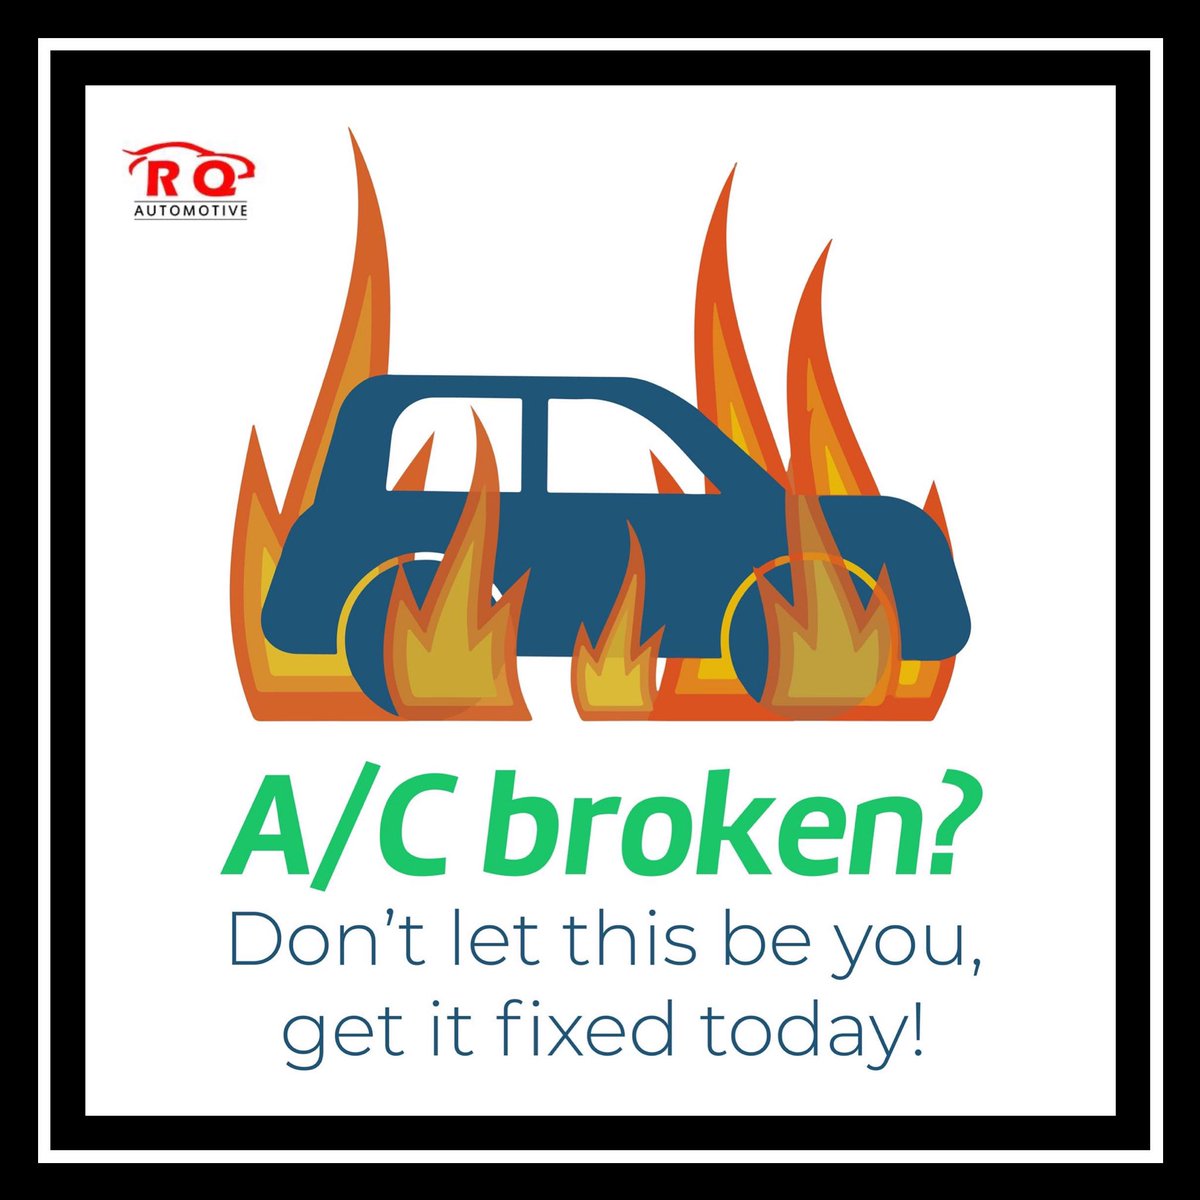 Summer is approaching and we can feel the burning heat in spring so be ready for a terrible summer,make sure you can stay cool during your daily commute! Fix your A/C before you endure another day of sweating in the car!
.
#SummerCarTips #EasyPayFinance #rqautomotive